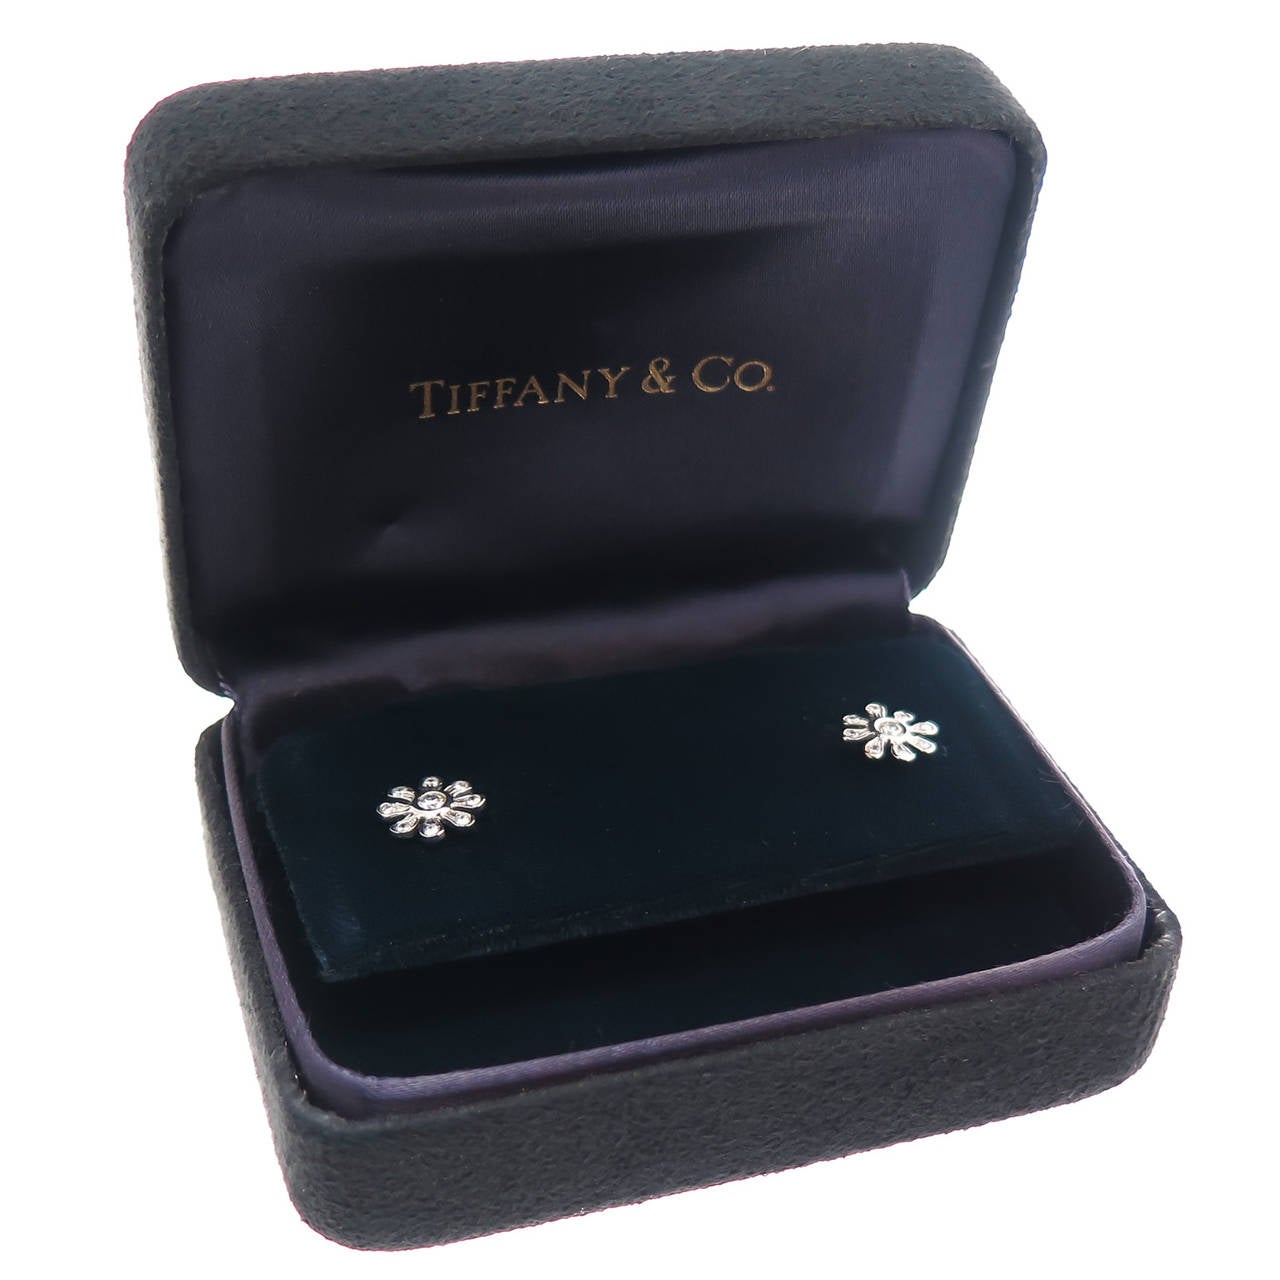 Circa 2005 Diamond and Platinum Earrings by Paloma Picasso for Tiffany and Company. Round Brilliant cut Diamonds totaling .30 Carats, measuring 3/8 inch in Diameter. Original Presentation Box.